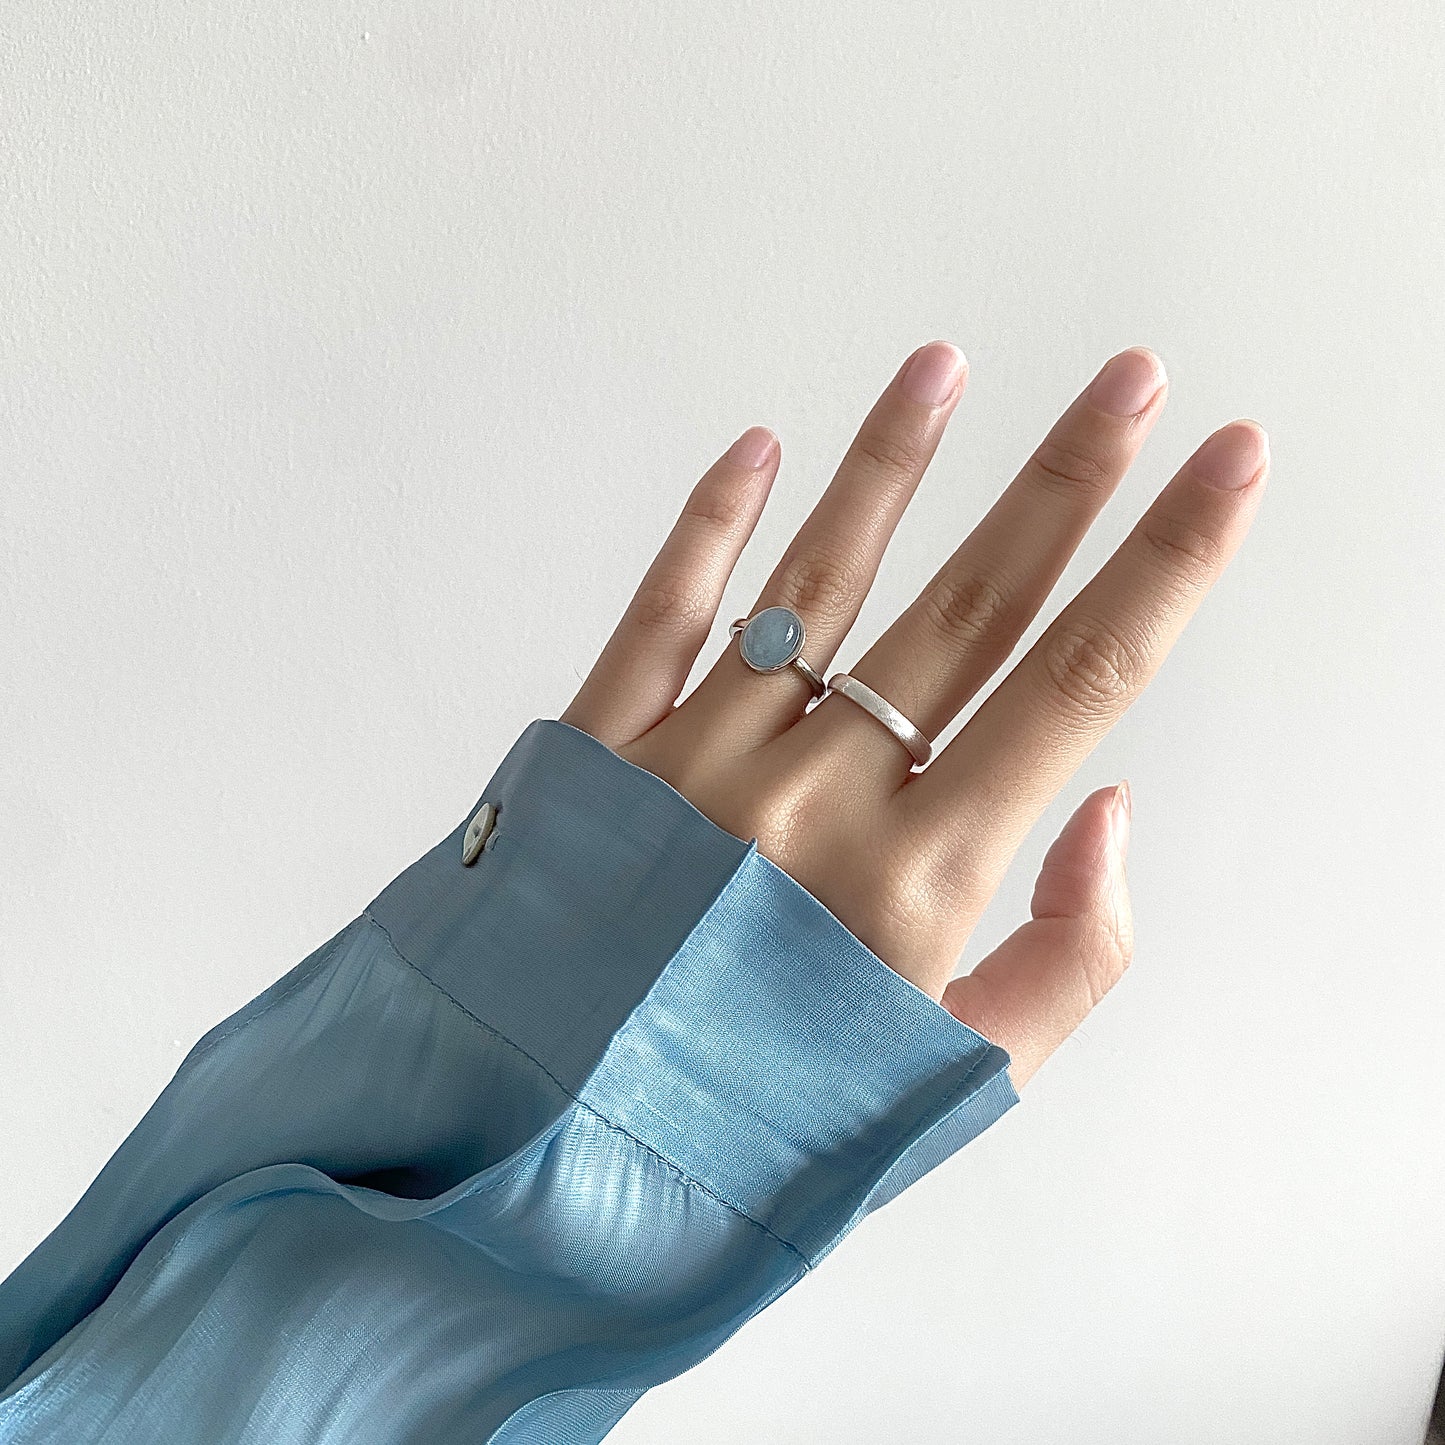 Brushed S925 Silver Minimalist Ring